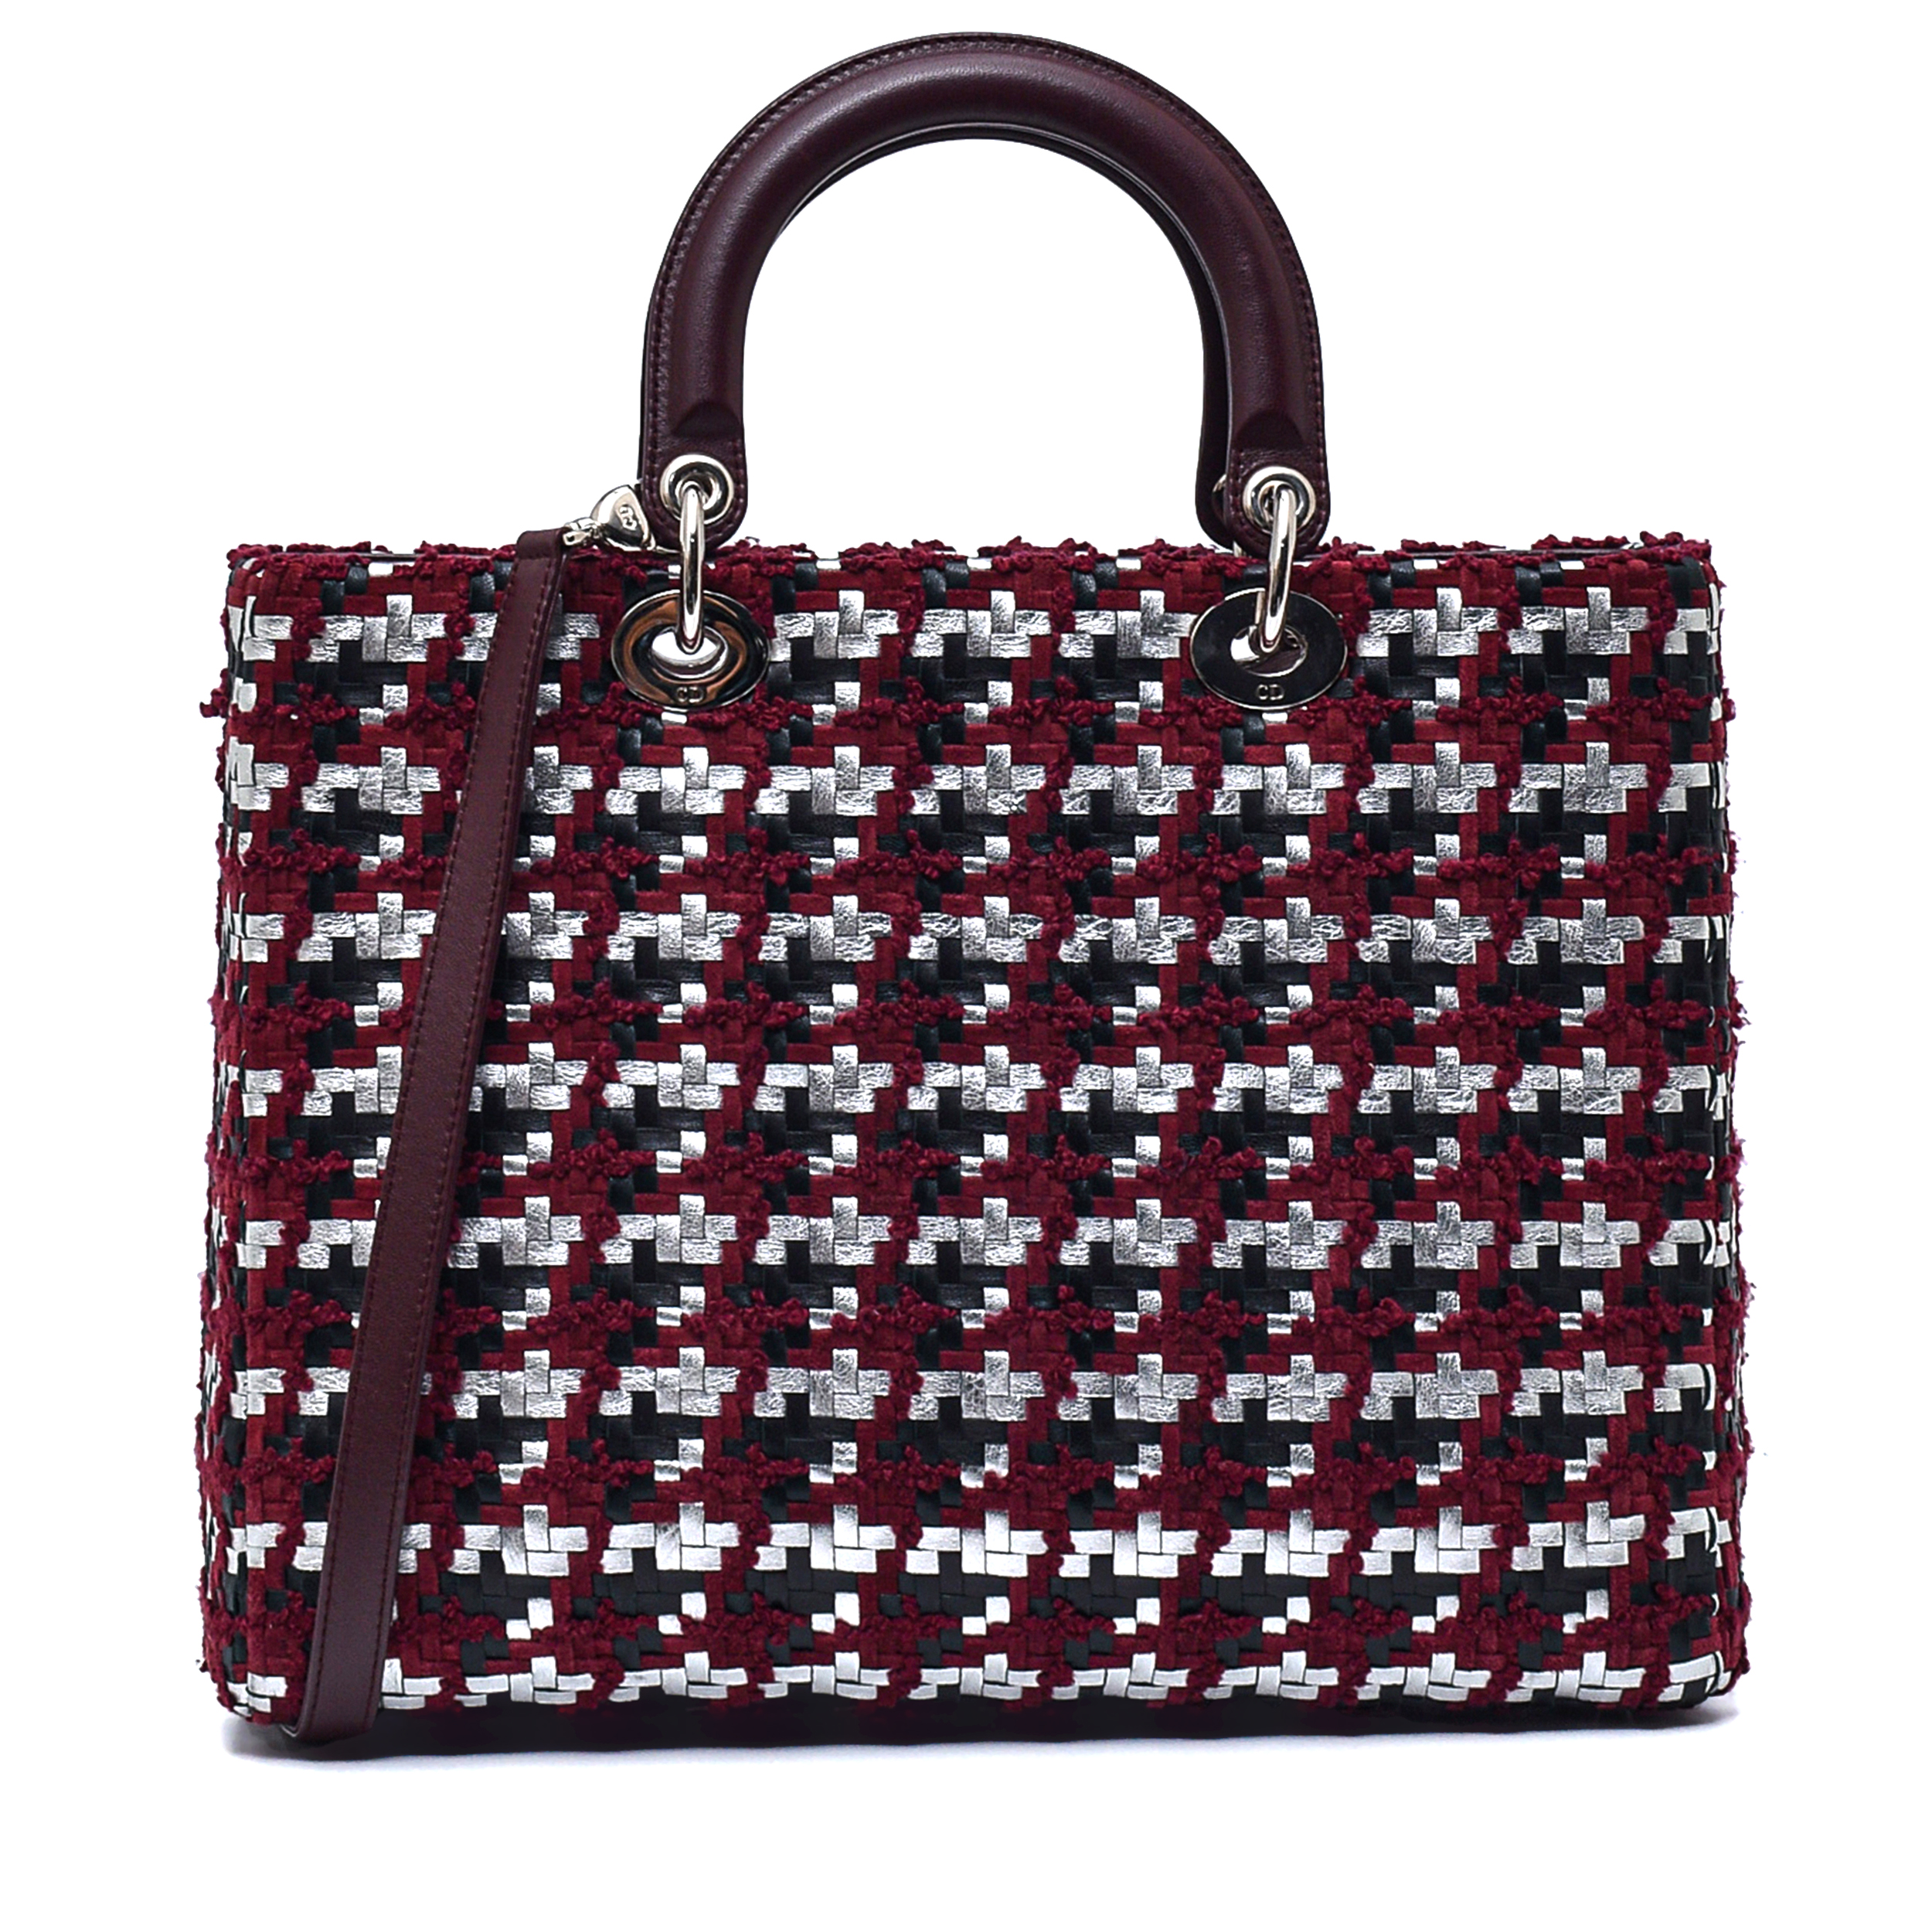 Christian Dior - Bordeaux Tweed&Nappa Woven Leather Large Lady Dior Bag